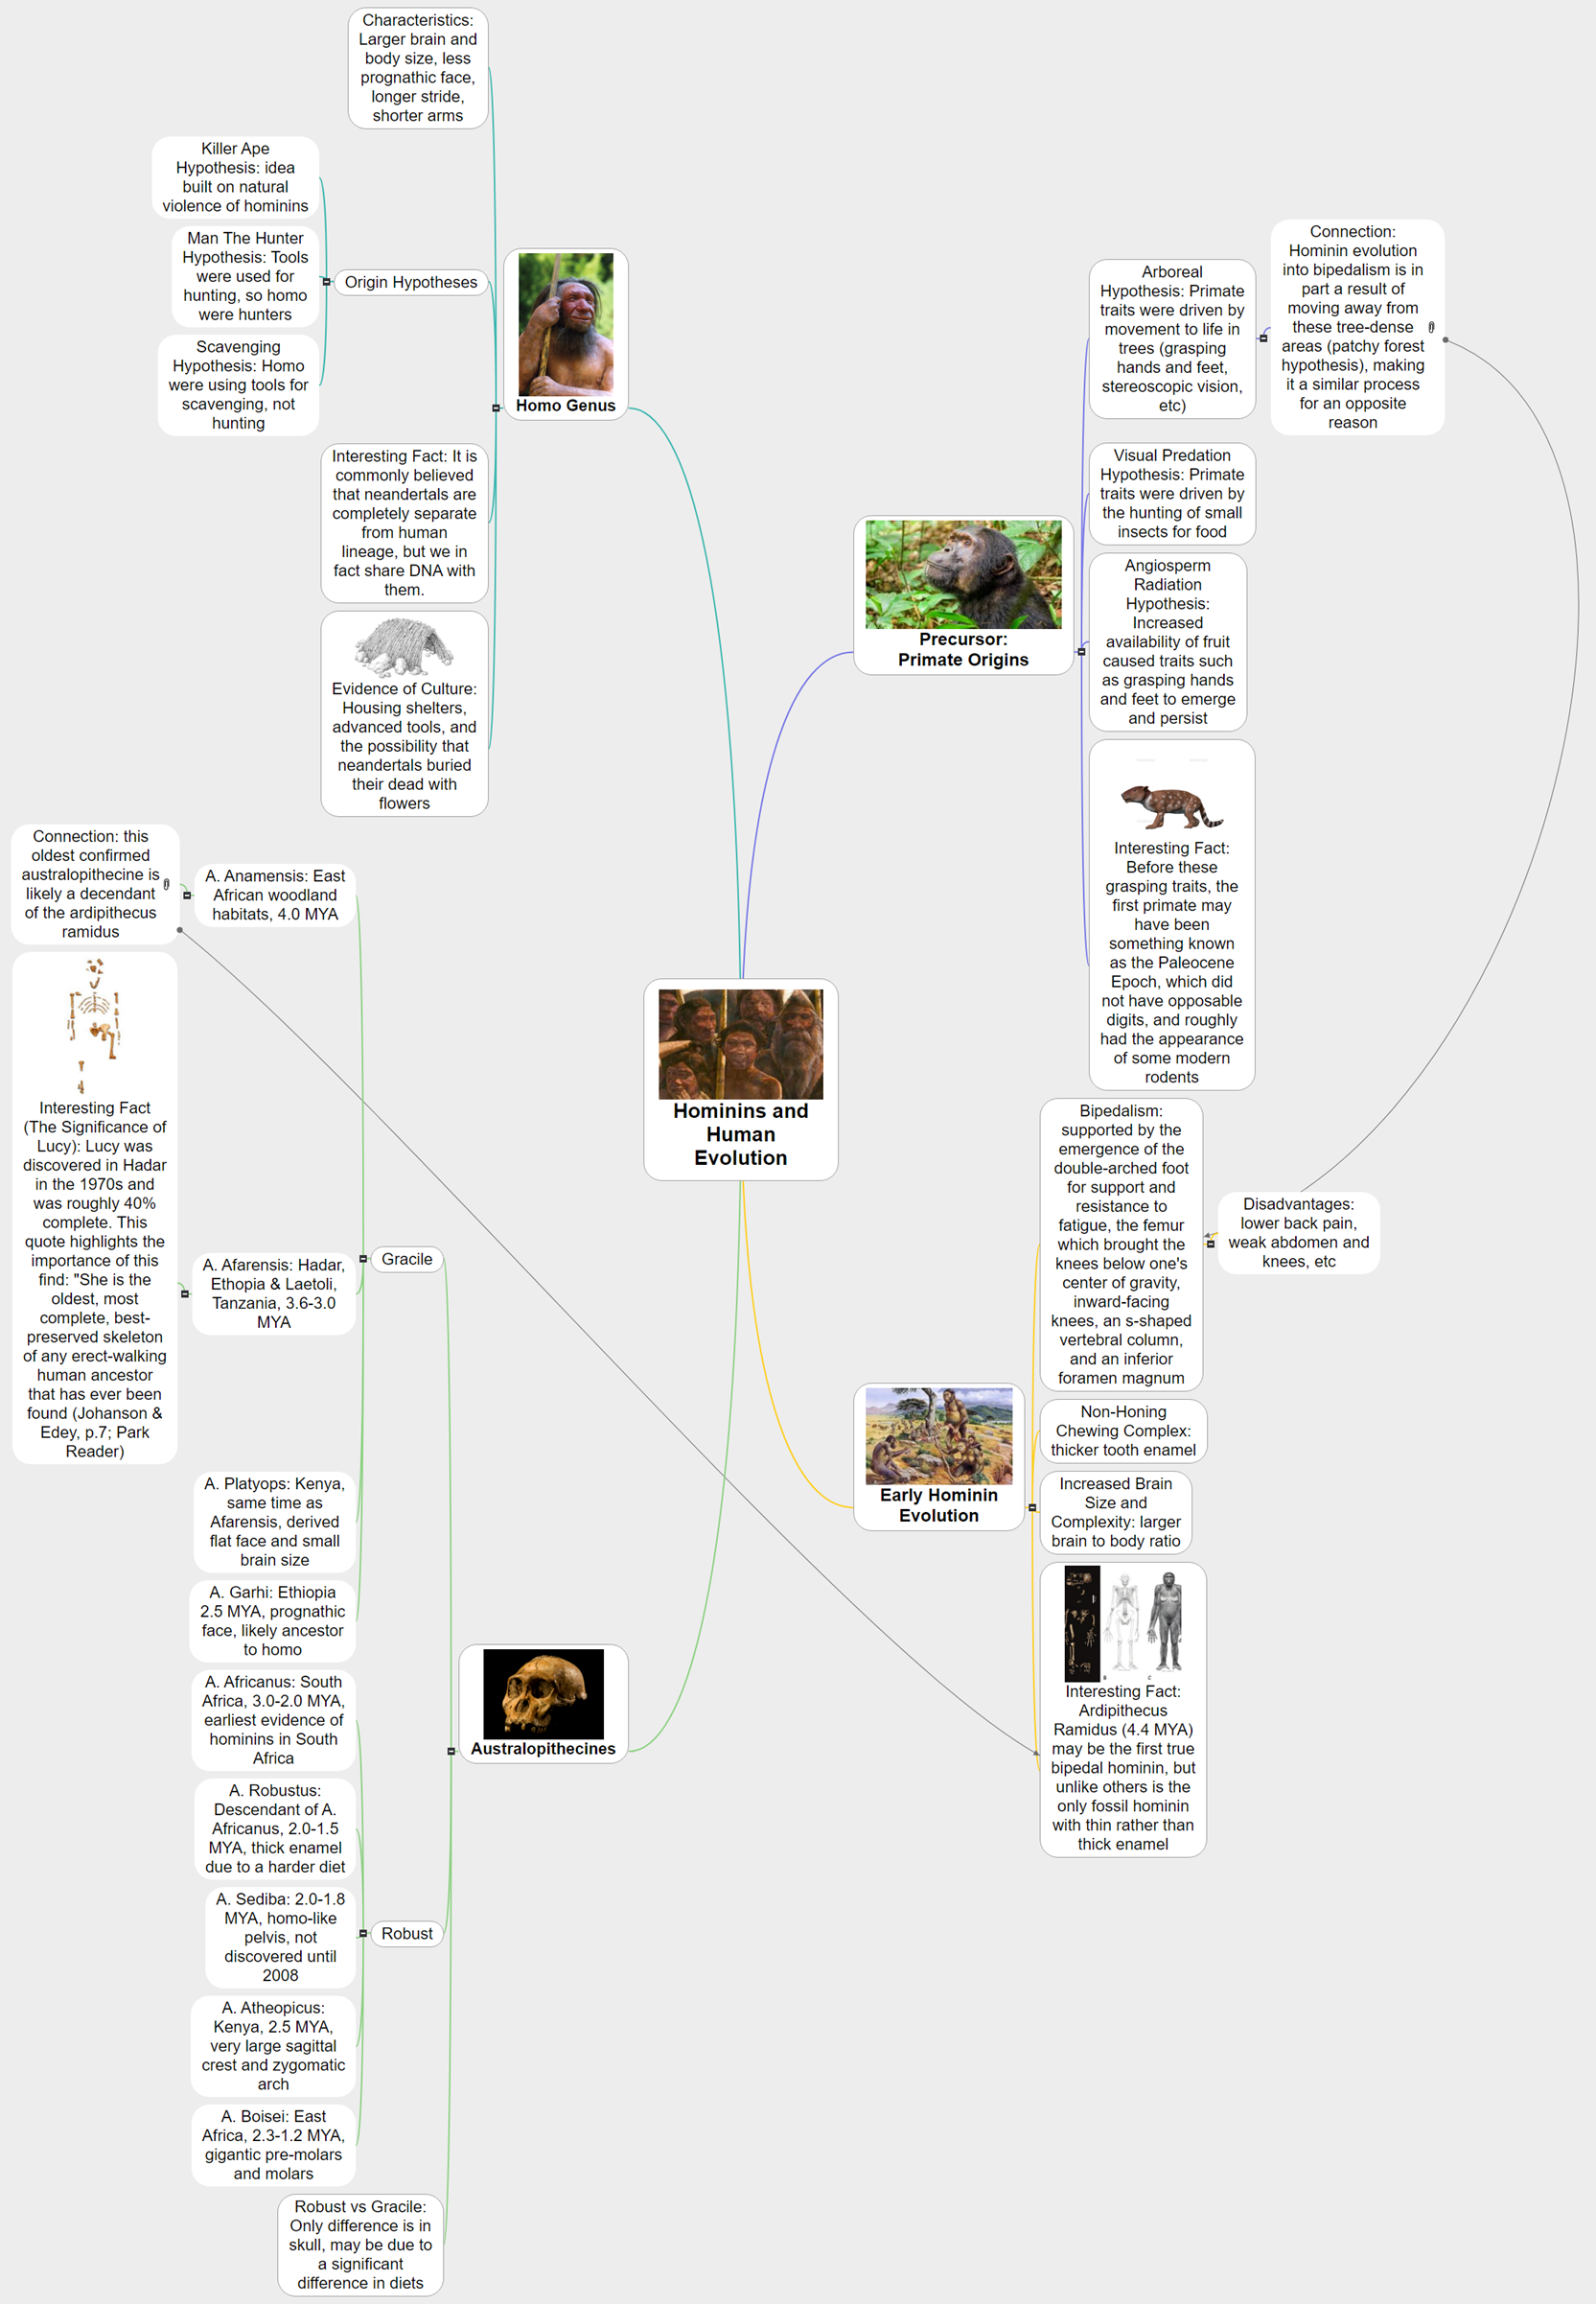 Hominins and Human Evolution (Visual Study Guide 3) Mind Map